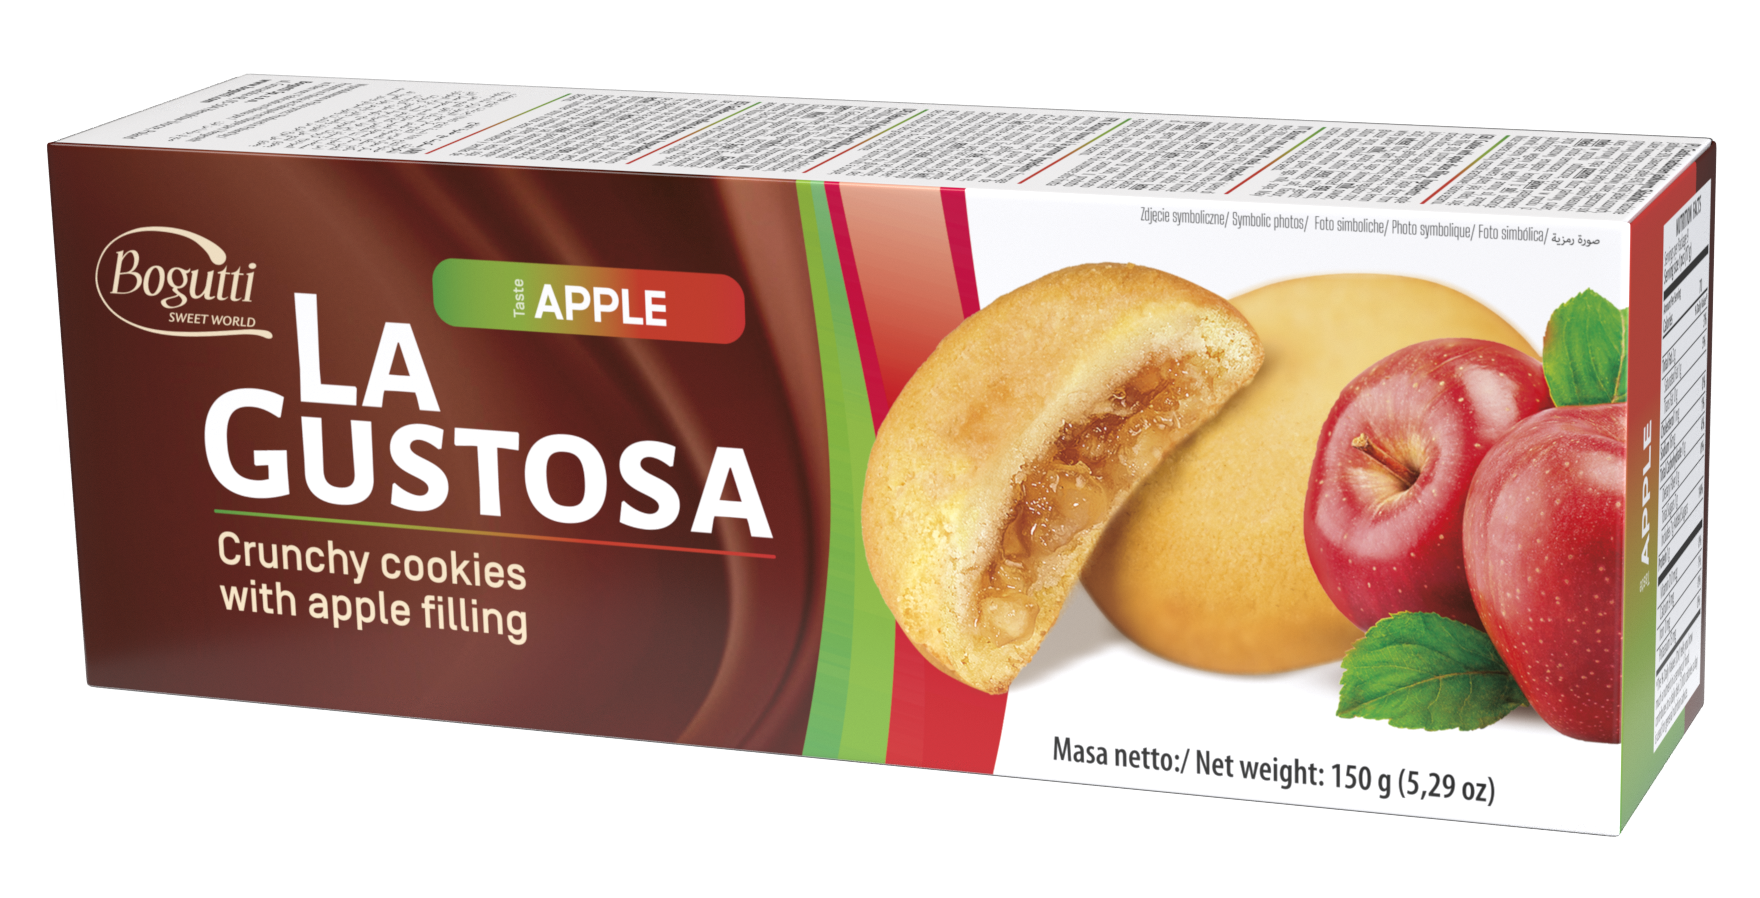 La Gustosa – Crunchy cookies with apple filling